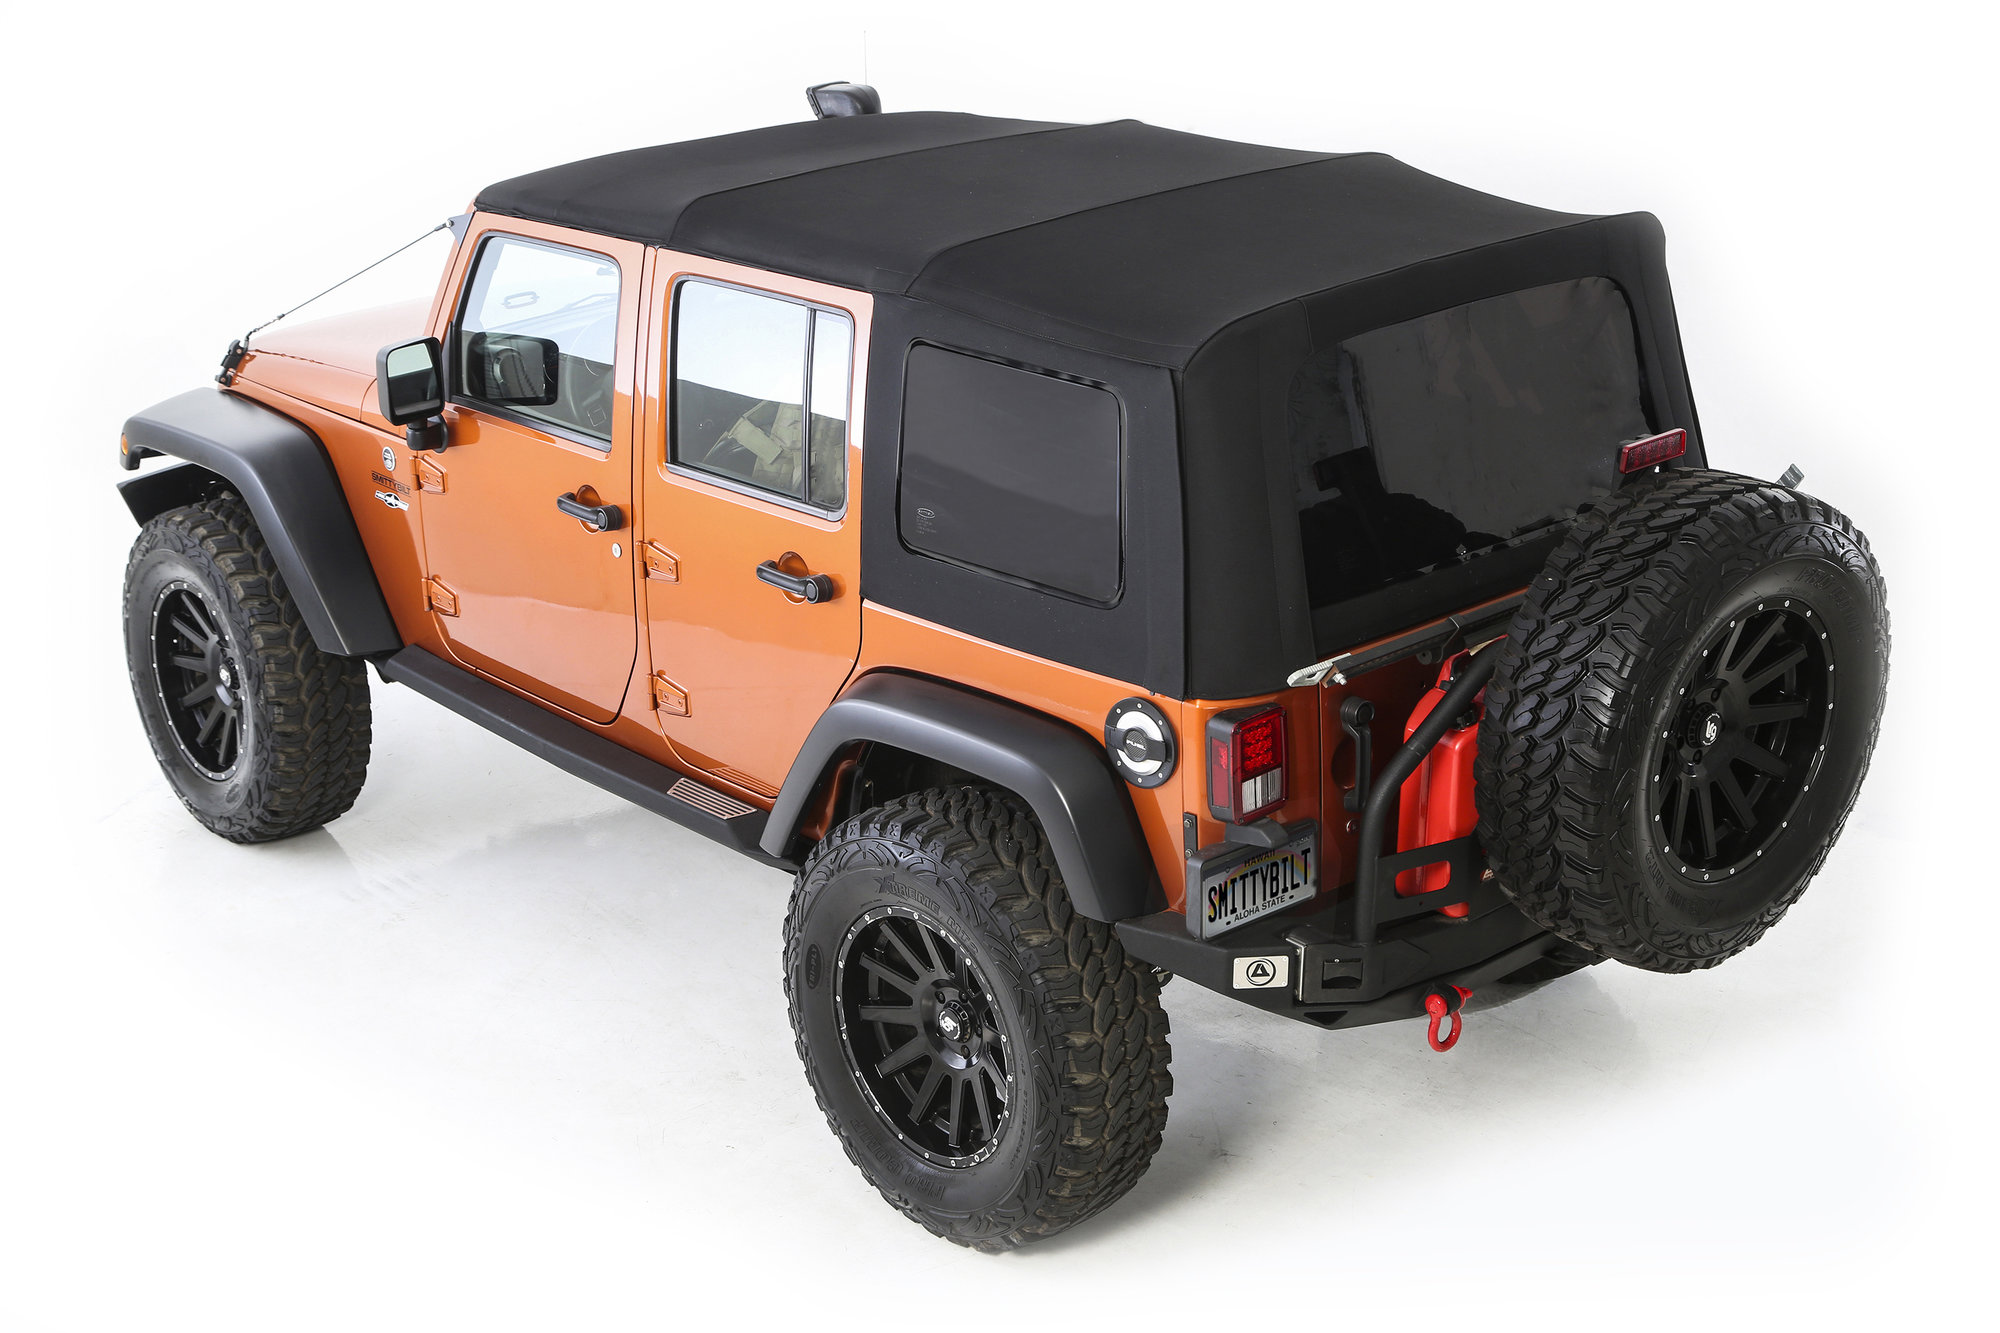 Smittybilt Premium Replacement Canvas Soft Top with Tinted Windows for 07-18  Jeep Wrangler Unlimited 4 Door | Quadratec